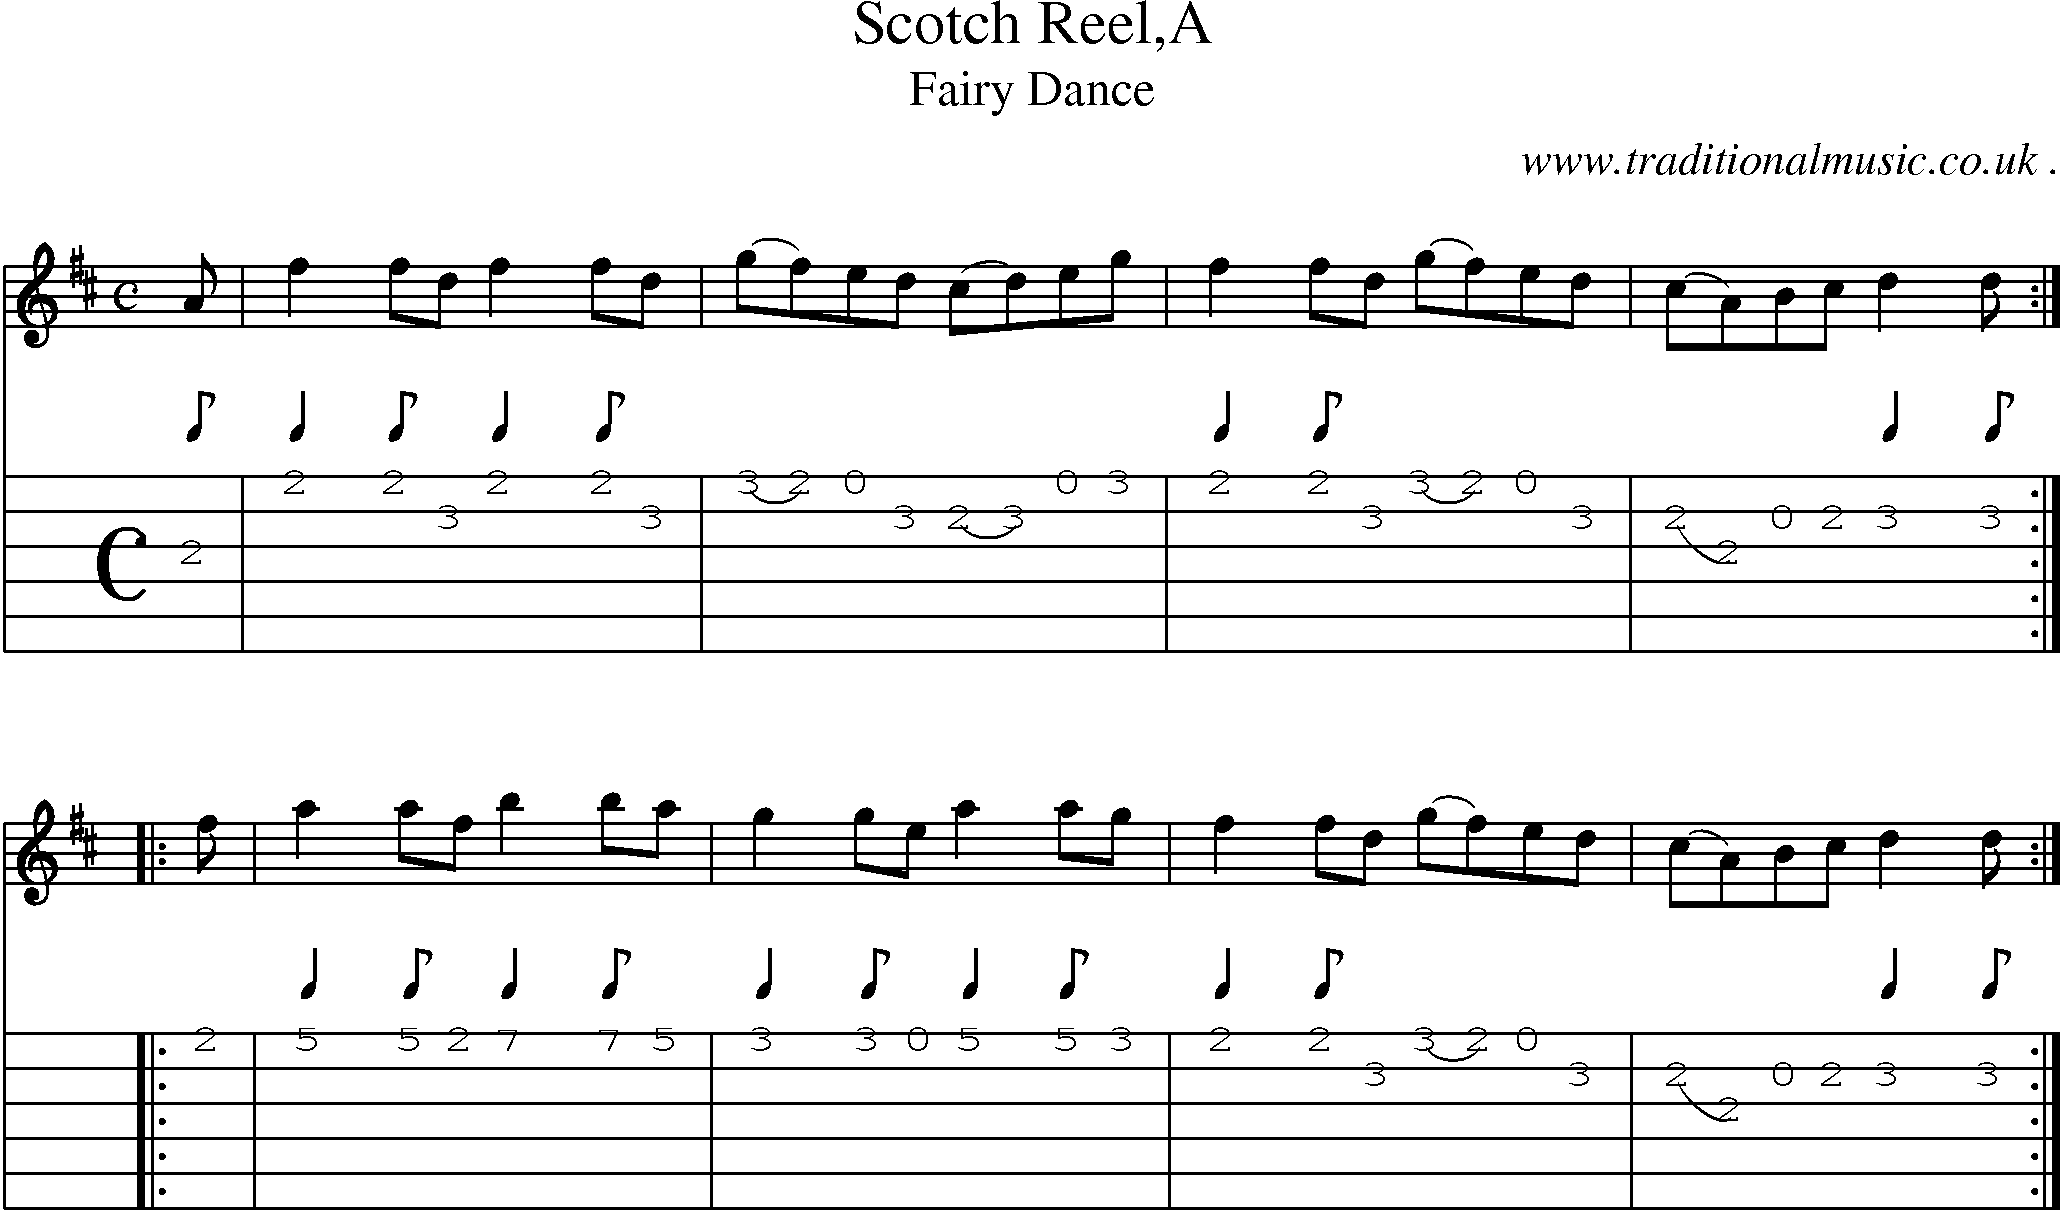 Sheet-Music and Guitar Tabs for Scotch Reela